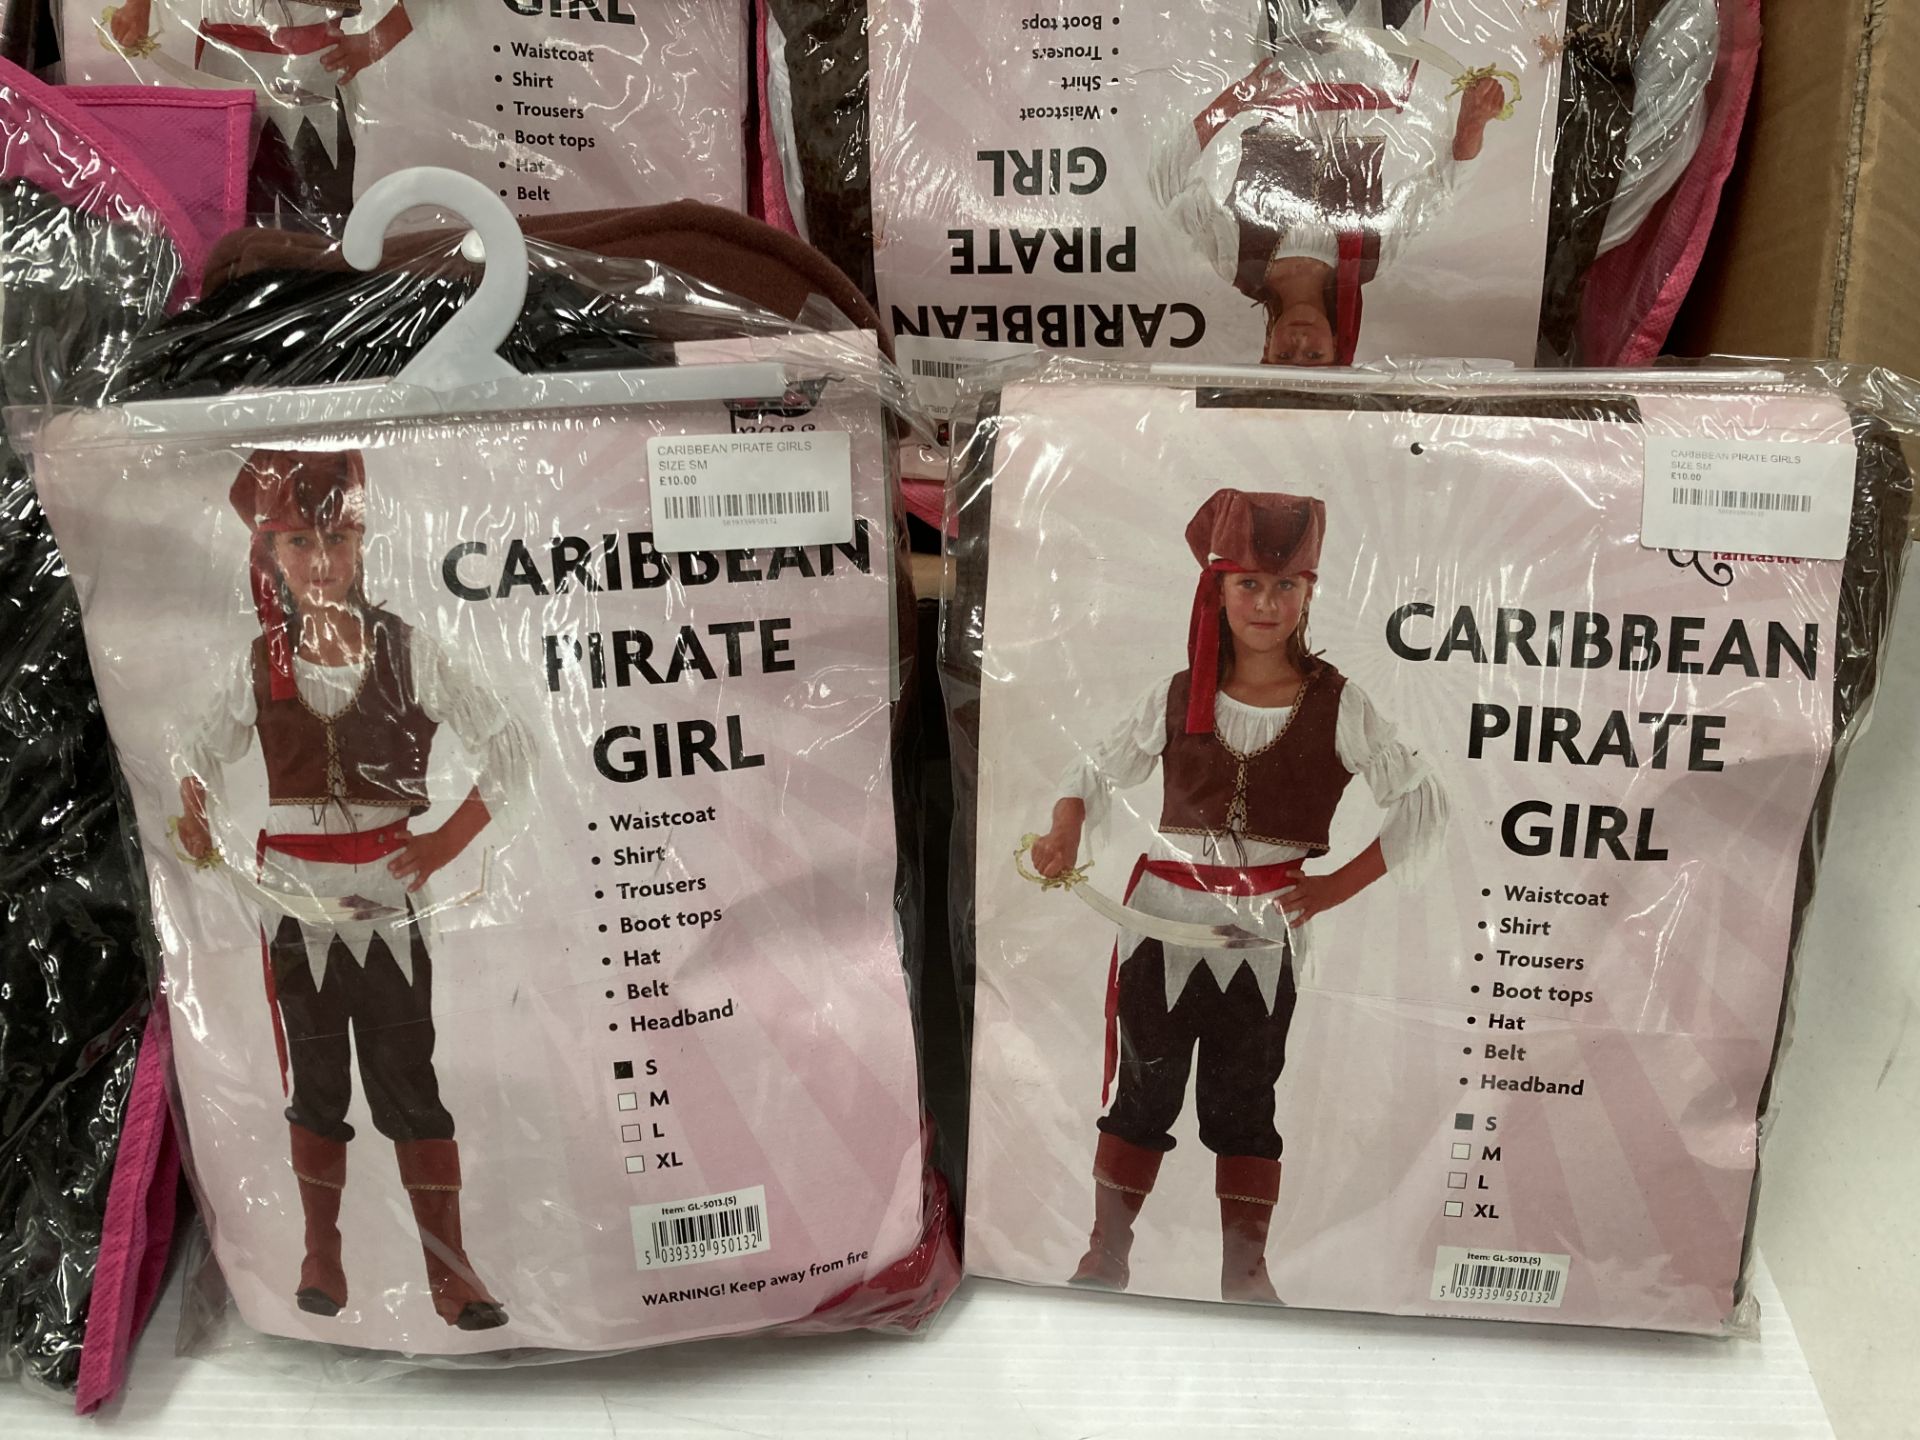 50 x fancy dress costumes in assorted sizes - Wild West Girl and Caribbean Pirate Girl (saleroom - Image 3 of 3